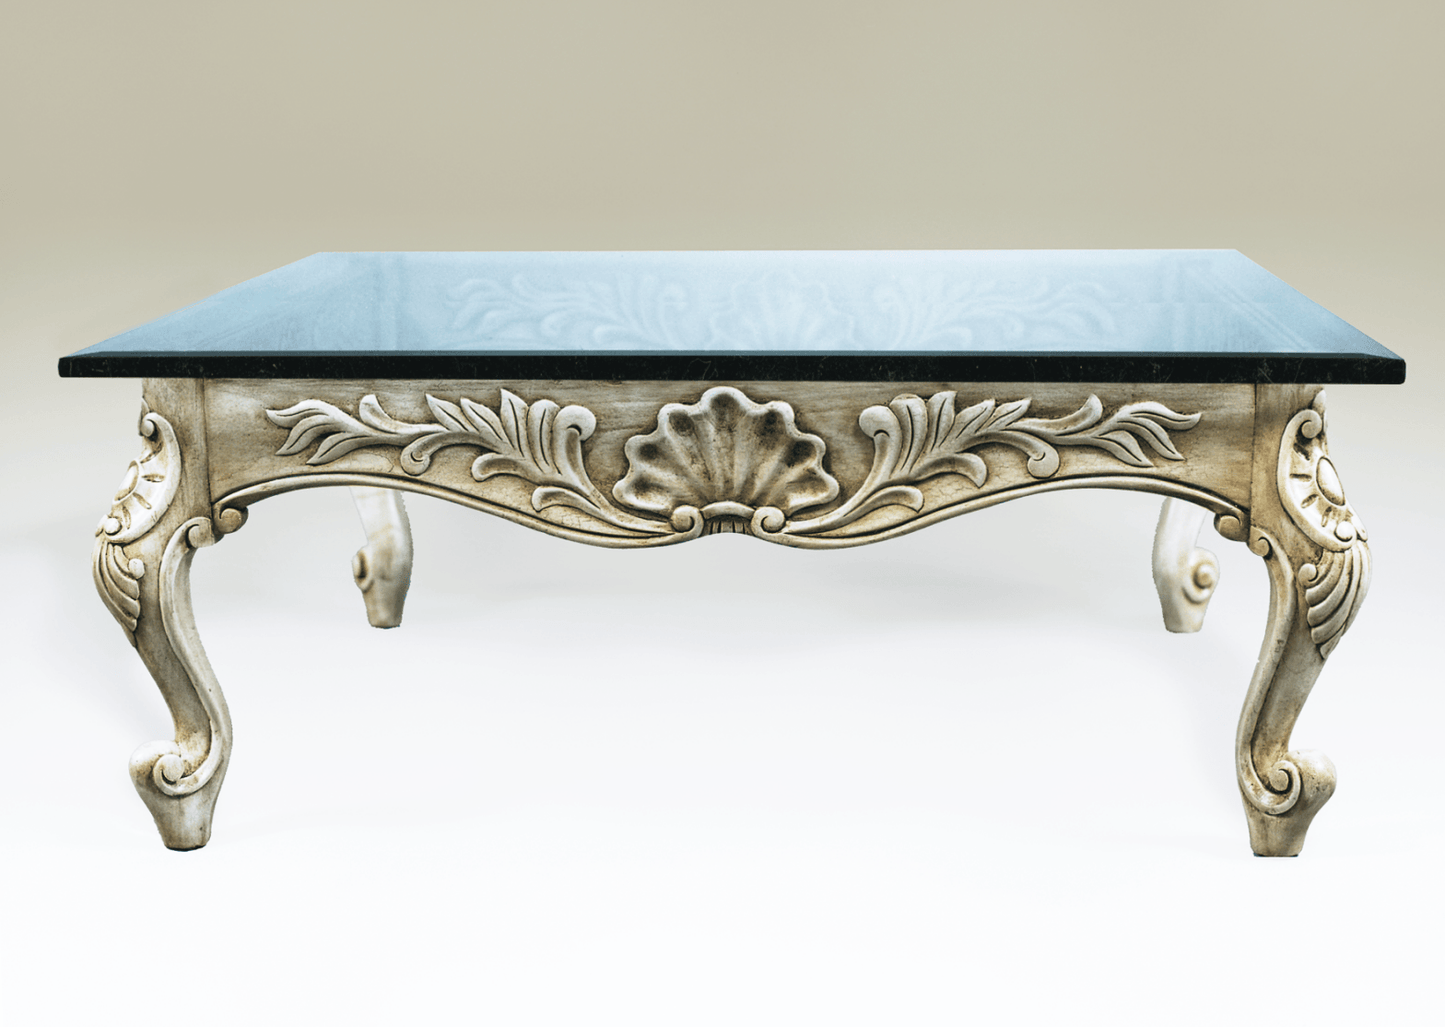 LOUIS XV STYLE COCKTAIL TABLE - House of Chippendale